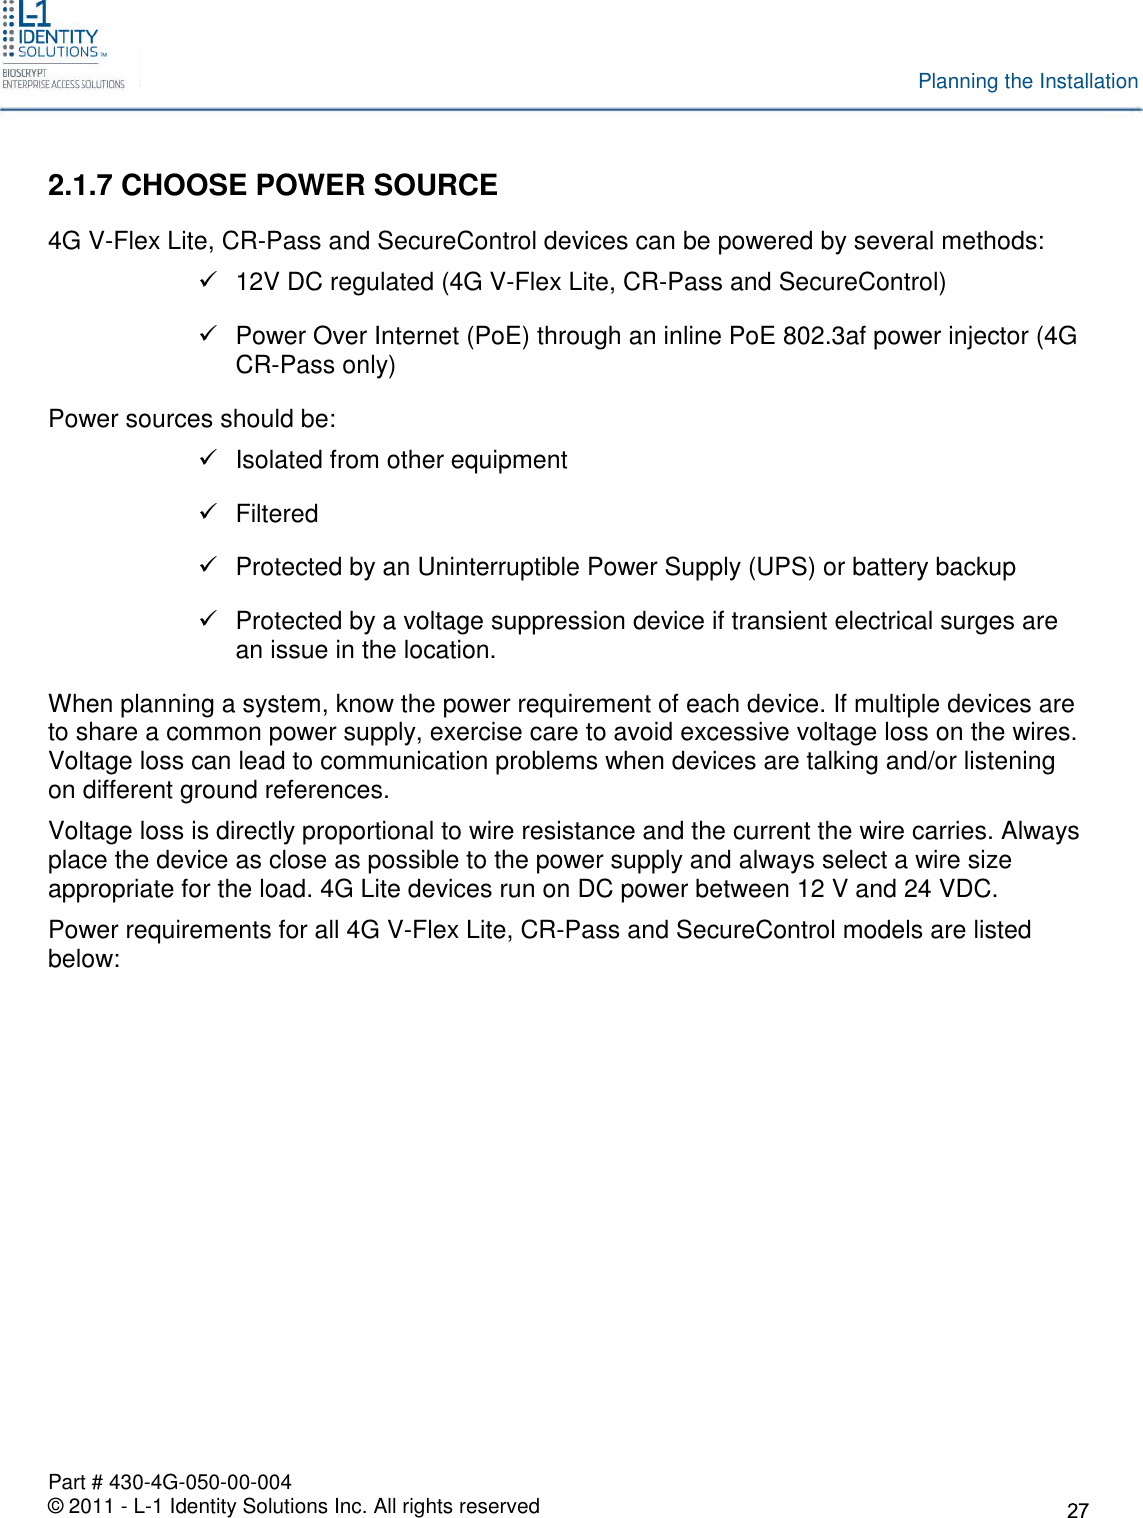 Part # 430-4G-050-00-004© 2011 - L-1 Identity Solutions Inc. All rights reservedPlanning the Installation2.1.7 CHOOSE POWER SOURCE4G V-Flex Lite, CR-Pass and SecureControl devices can be powered by several methods:12V DC regulated (4G V-Flex Lite, CR-Pass and SecureControl)Power Over Internet (PoE) through an inline PoE 802.3af power injector (4GCR-Pass only)Power sources should be:Isolated from other equipmentFilteredProtected by an Uninterruptible Power Supply (UPS) or battery backupProtected by a voltage suppression device if transient electrical surges arean issue in the location.When planning a system, know the power requirement of each device. If multiple devices areto share a common power supply, exercise care to avoid excessive voltage loss on the wires.Voltage loss can lead to communication problems when devices are talking and/or listeningon different ground references.Voltage loss is directly proportional to wire resistance and the current the wire carries. Alwaysplace the device as close as possible to the power supply and always select a wire sizeappropriate for the load. 4G Lite devices run on DC power between 12 V and 24 VDC.Power requirements for all 4G V-Flex Lite, CR-Pass and SecureControl models are listedbelow: